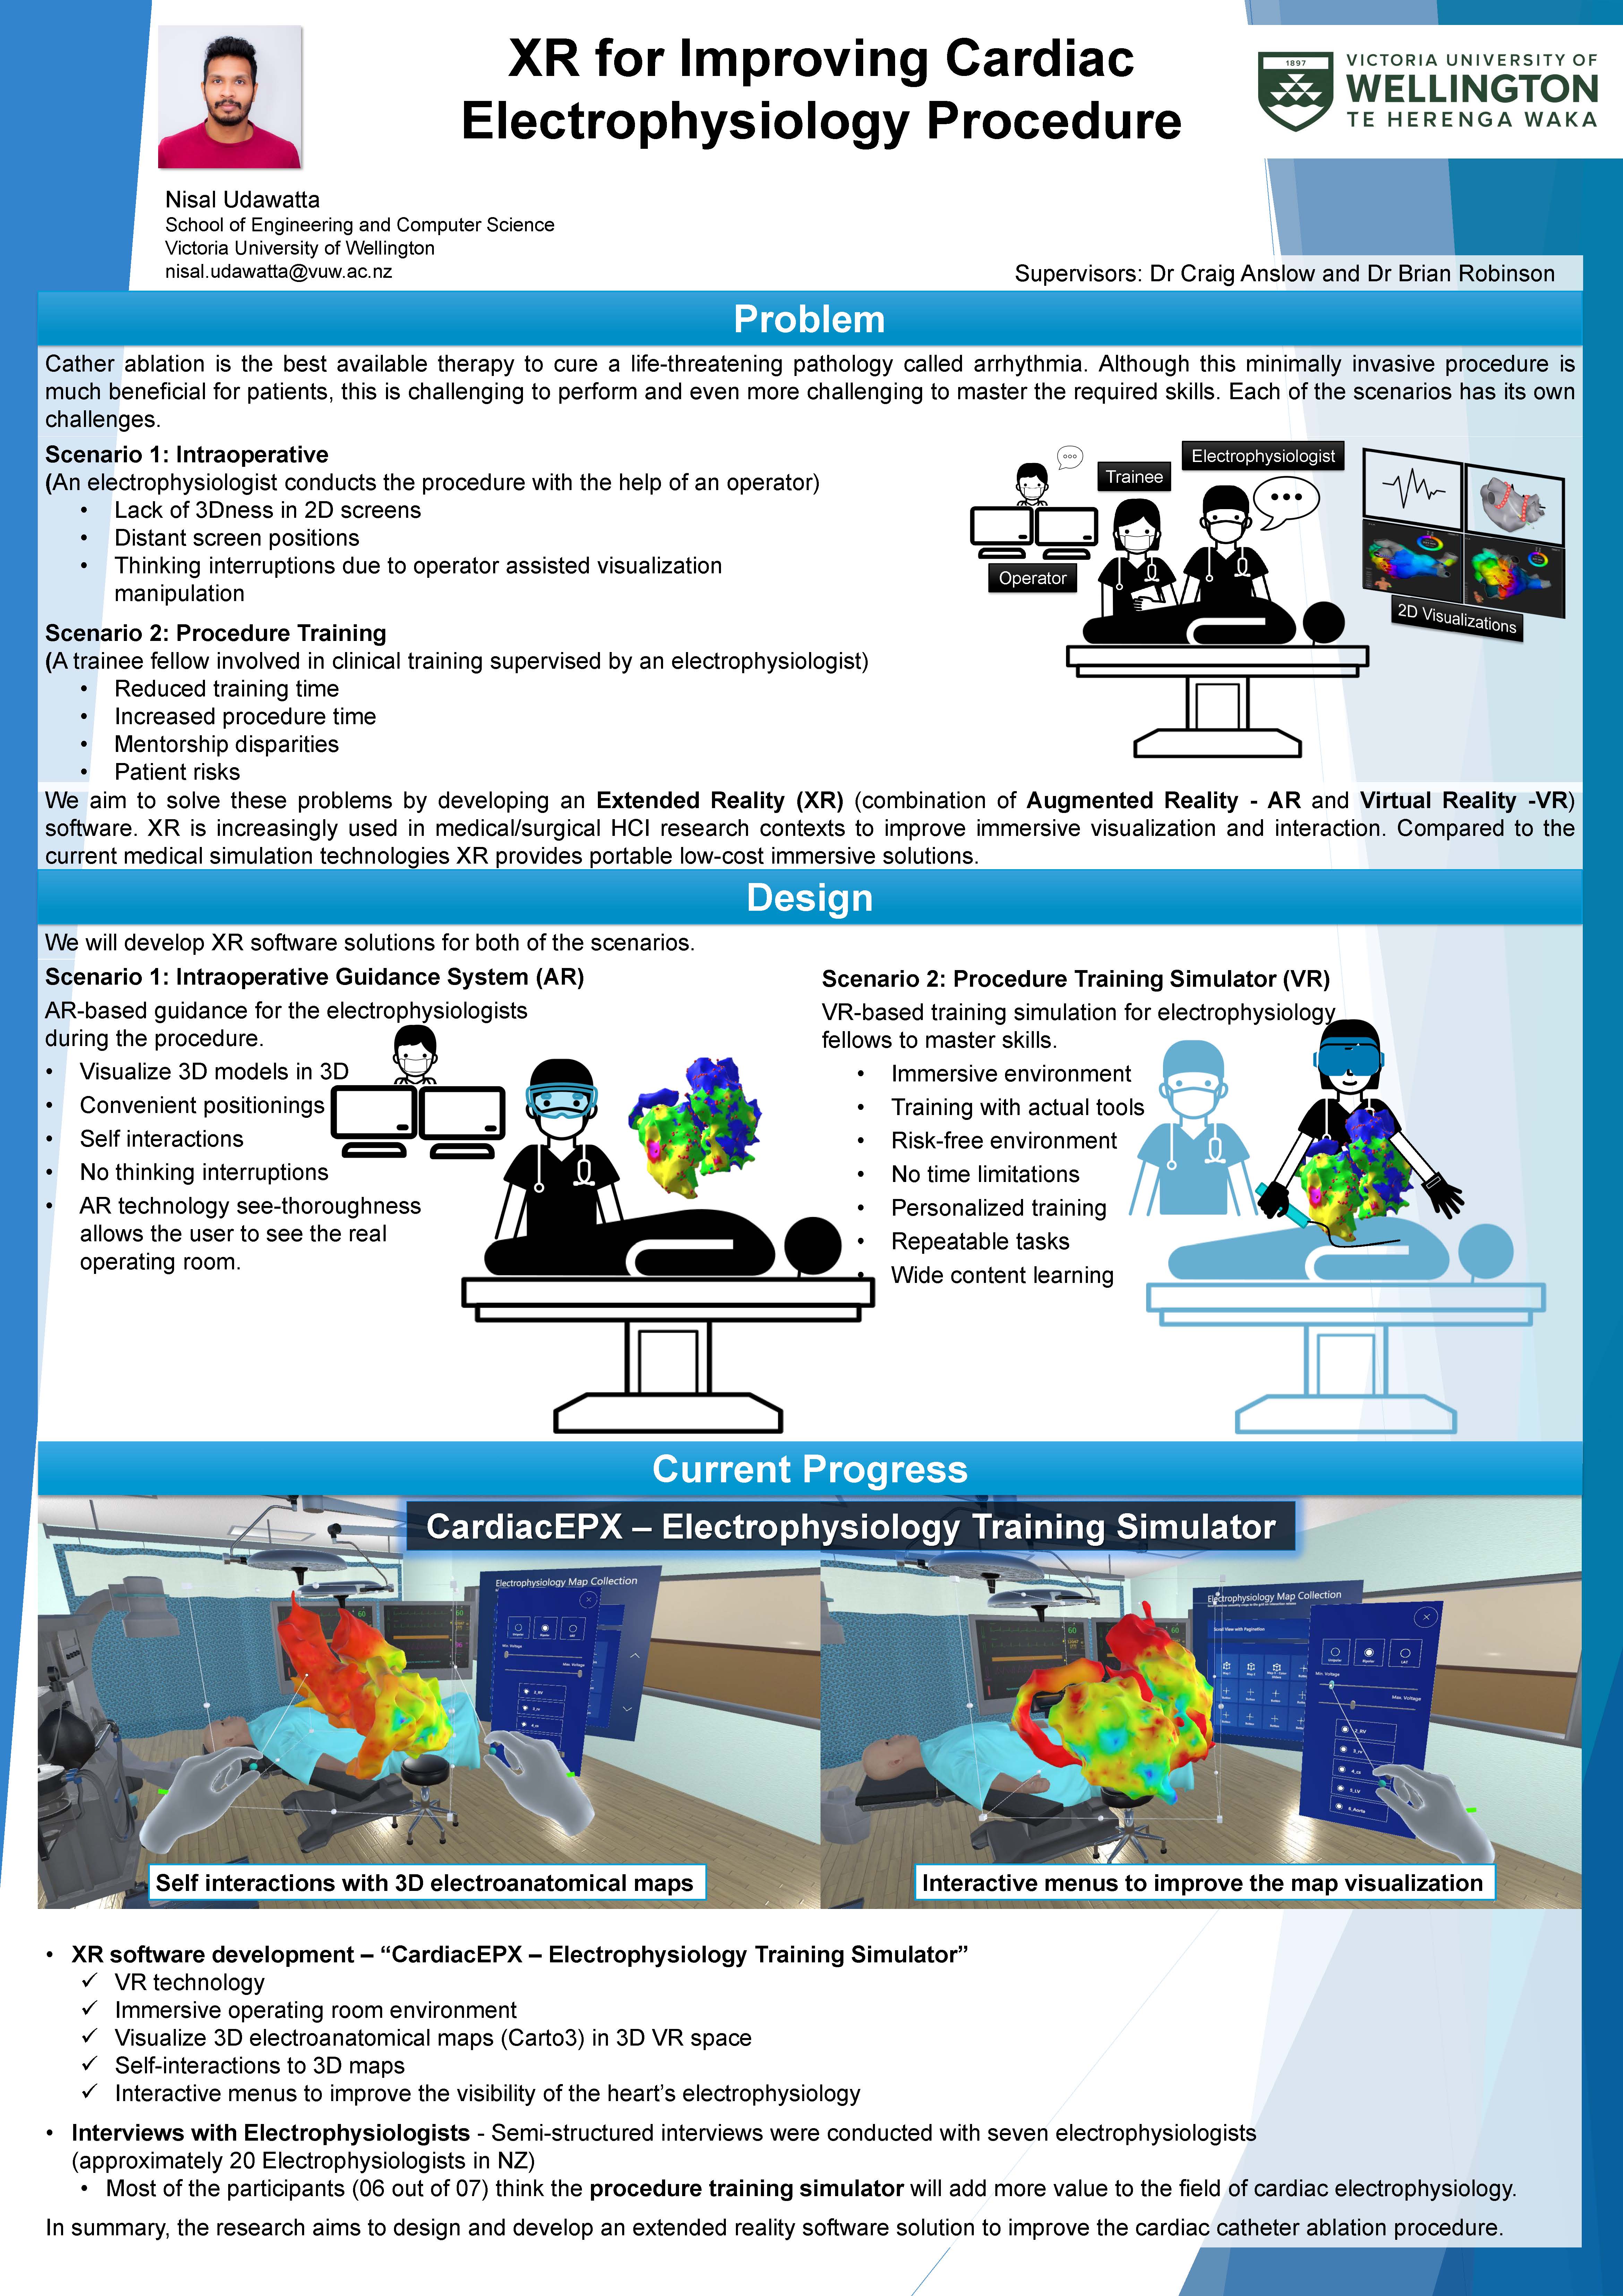 A thumbnail of the poster. It has blue borders, images and diagrams.